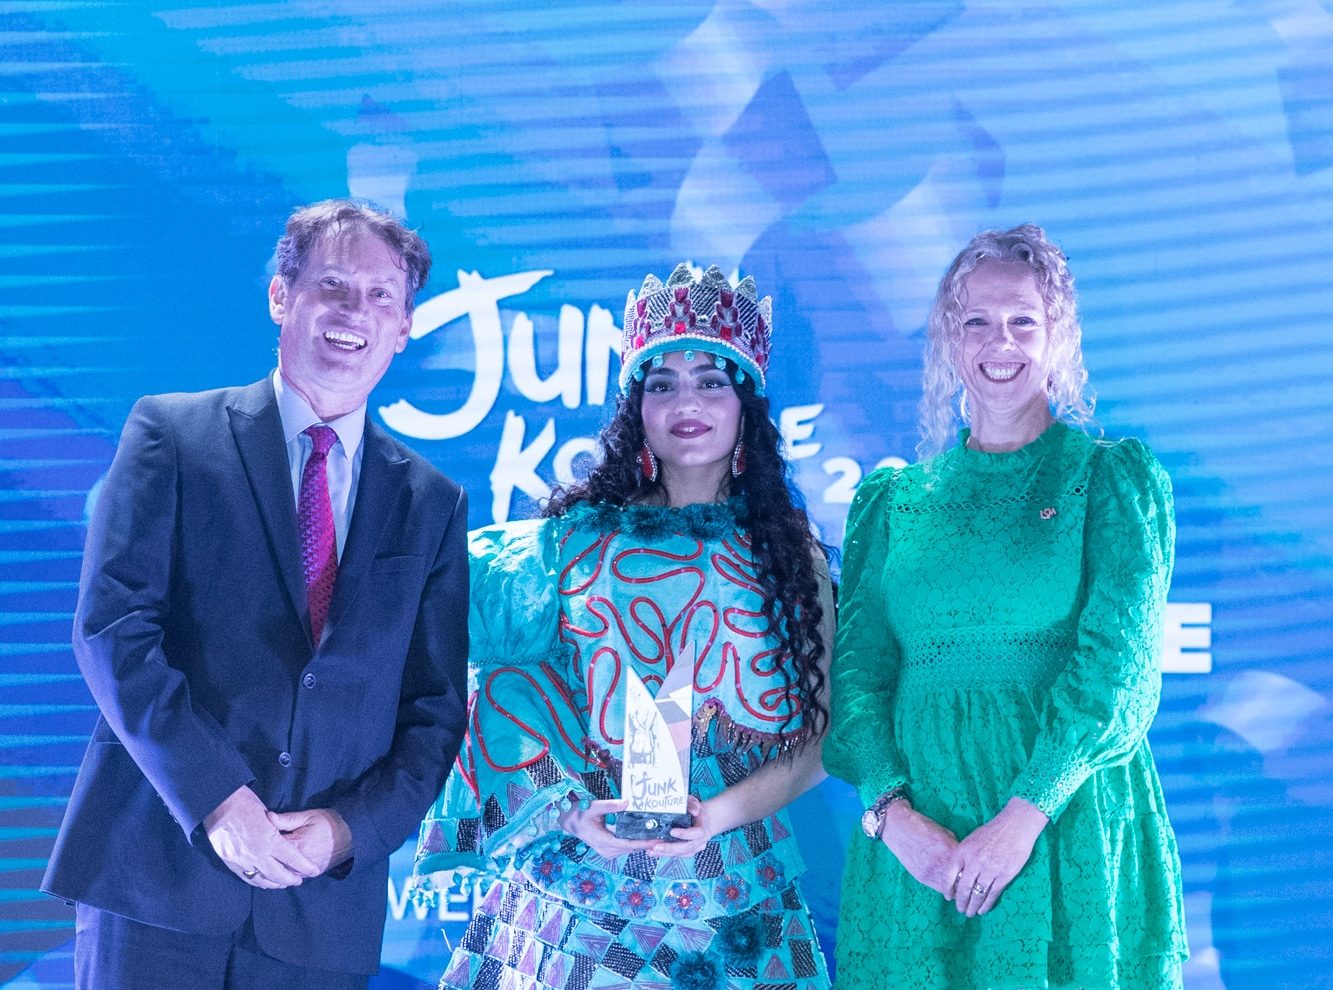 ISM collaborates with Junk Kouture in world final Image